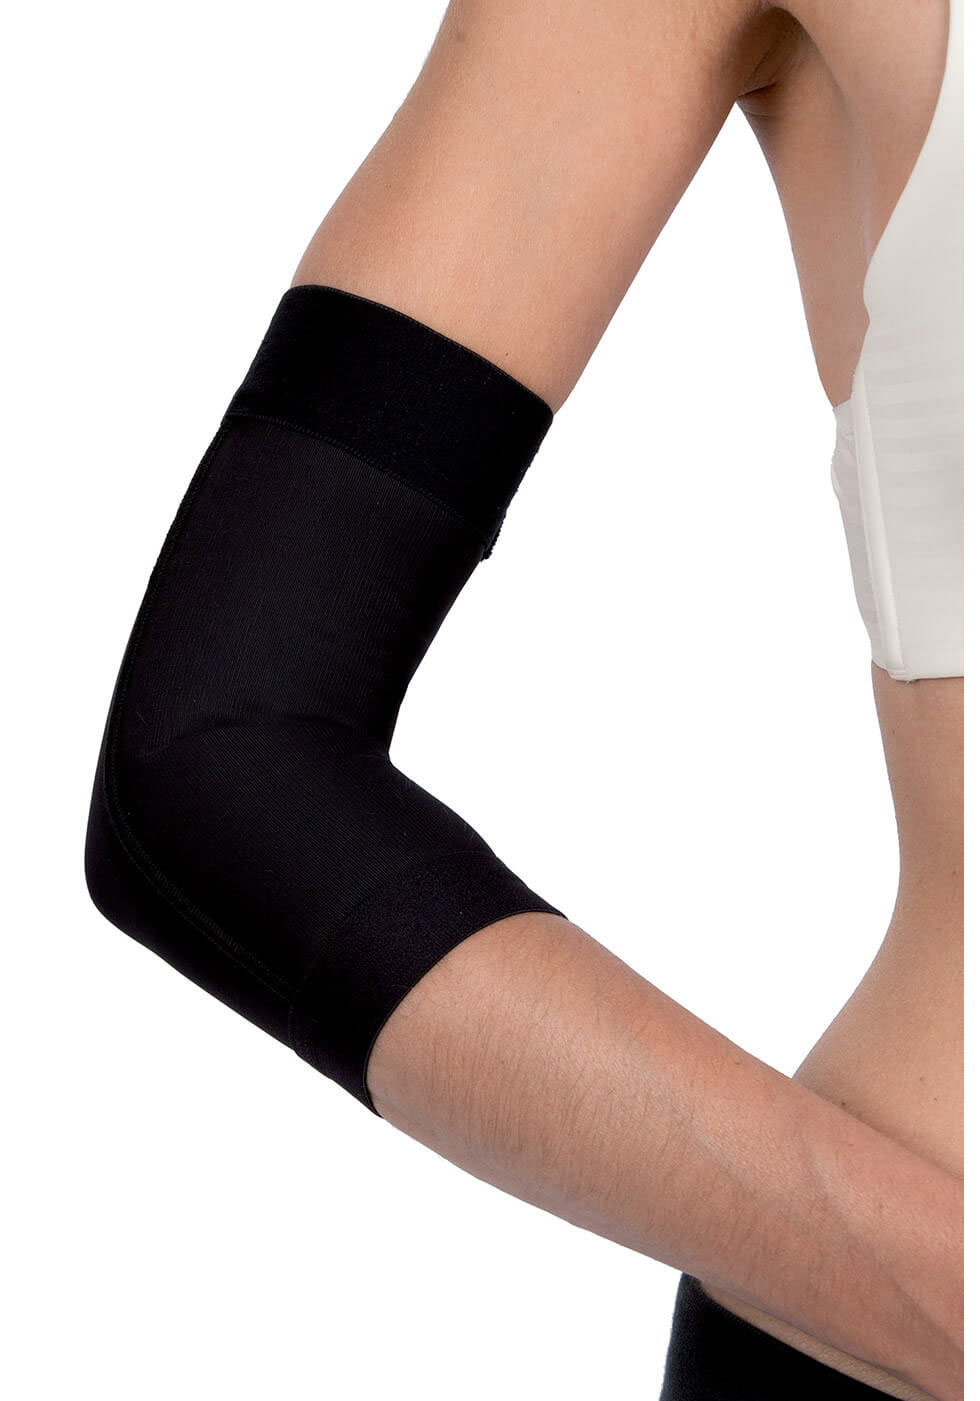 Compressive vest for patient with Ehlers Danlos syndrome - Euromi